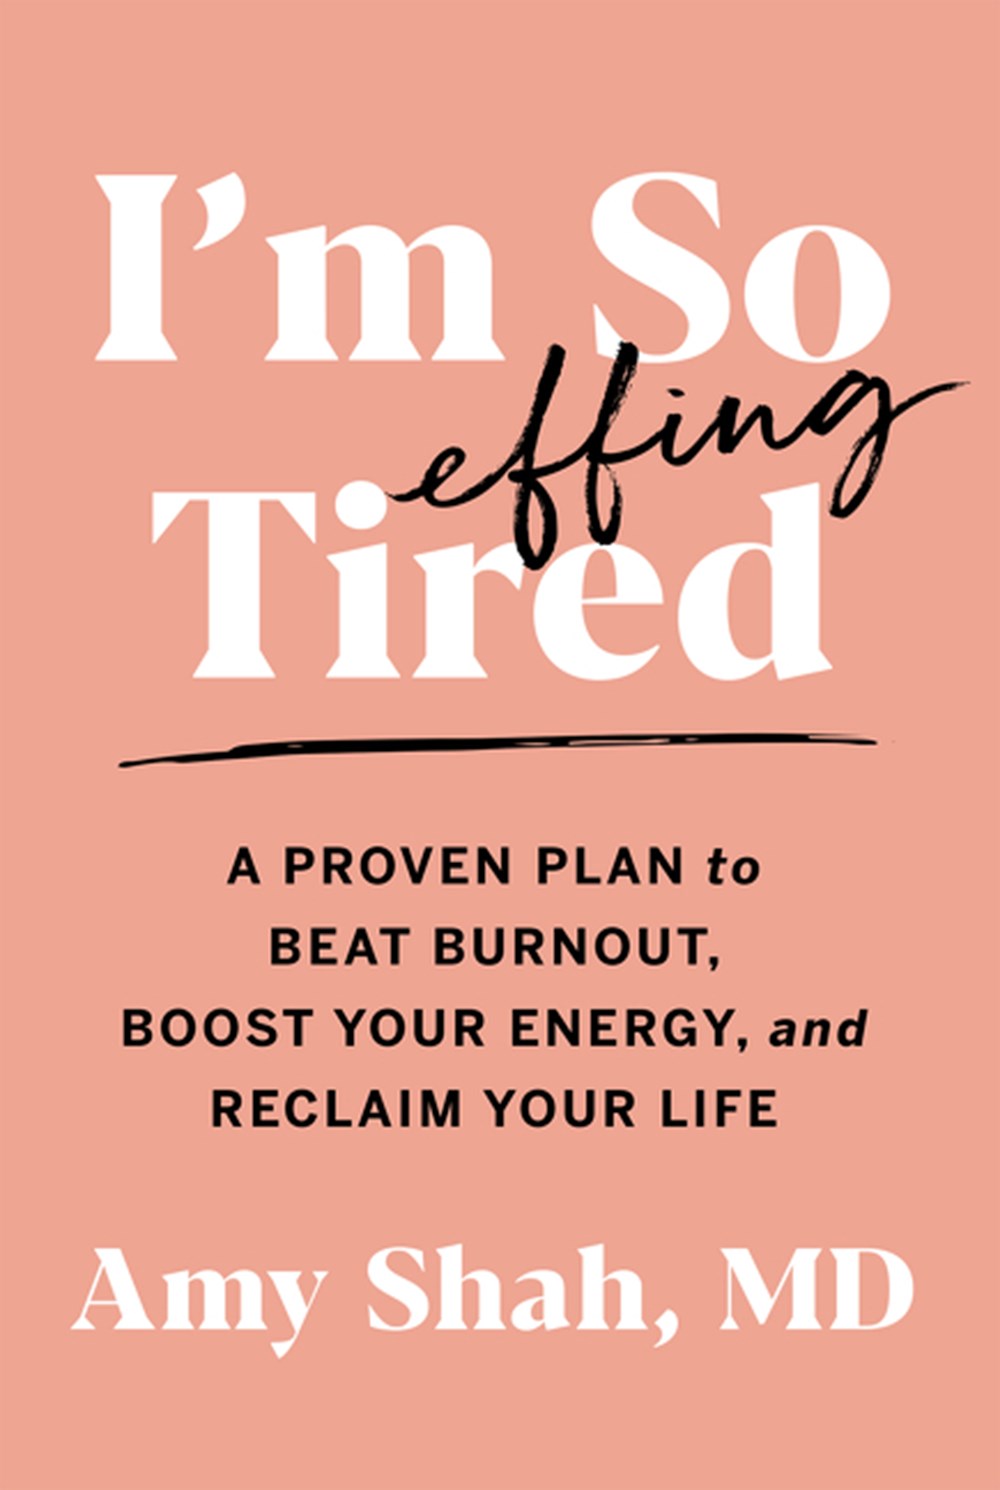 I'm So Effing Tired A Proven Plan to Beat Burnout, Boost Your Energy, and Reclaim Your Life